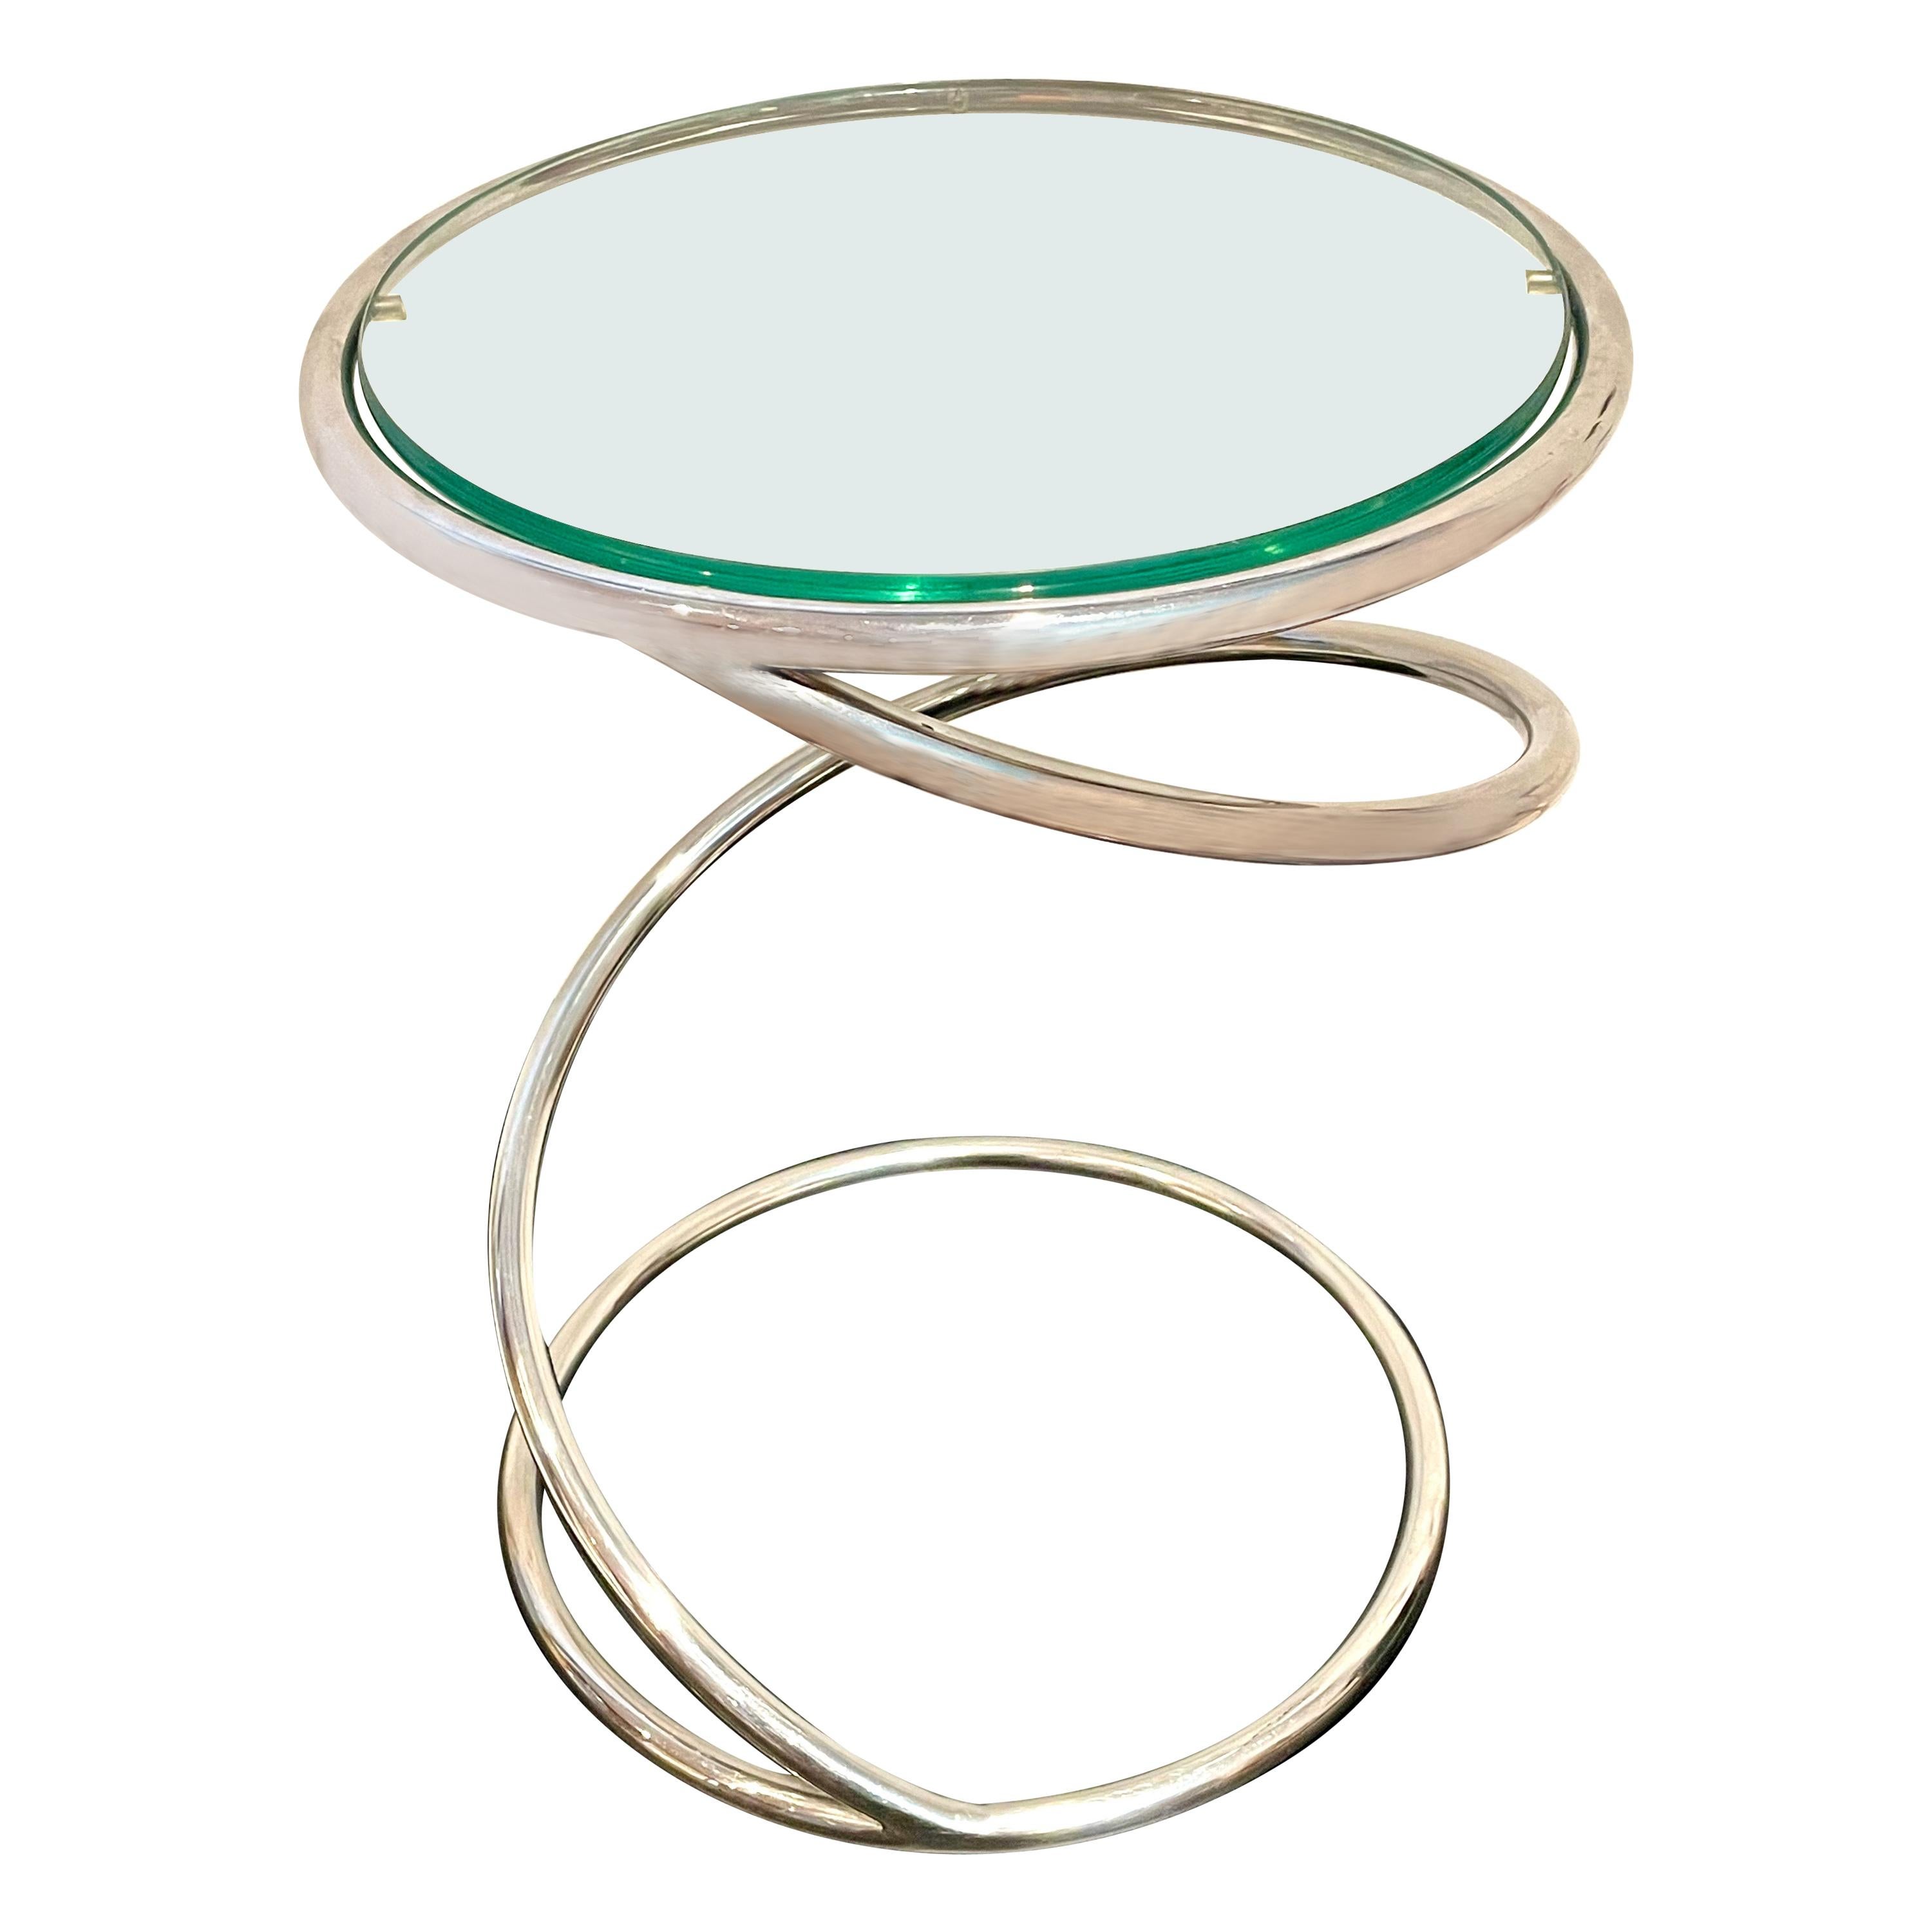 1970s Spring Cocktail Table Designed by Leon Rosen for Pace